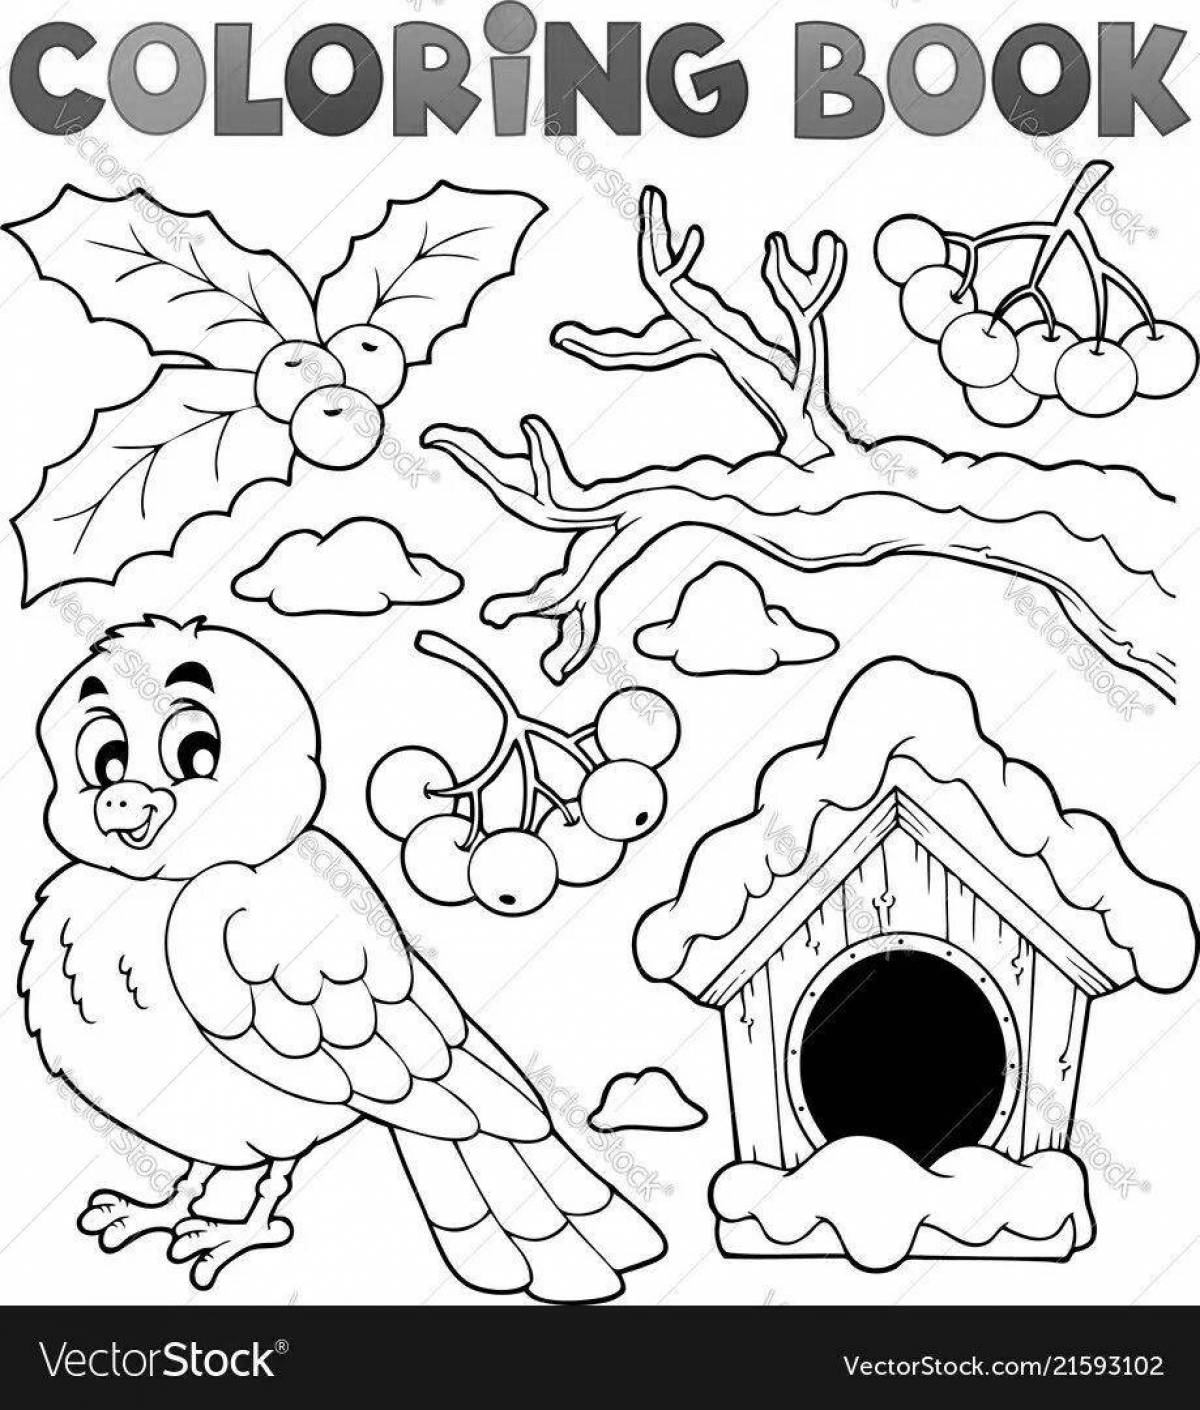 Splendid feed the birds in winter coloring pages for children 6-7 years old